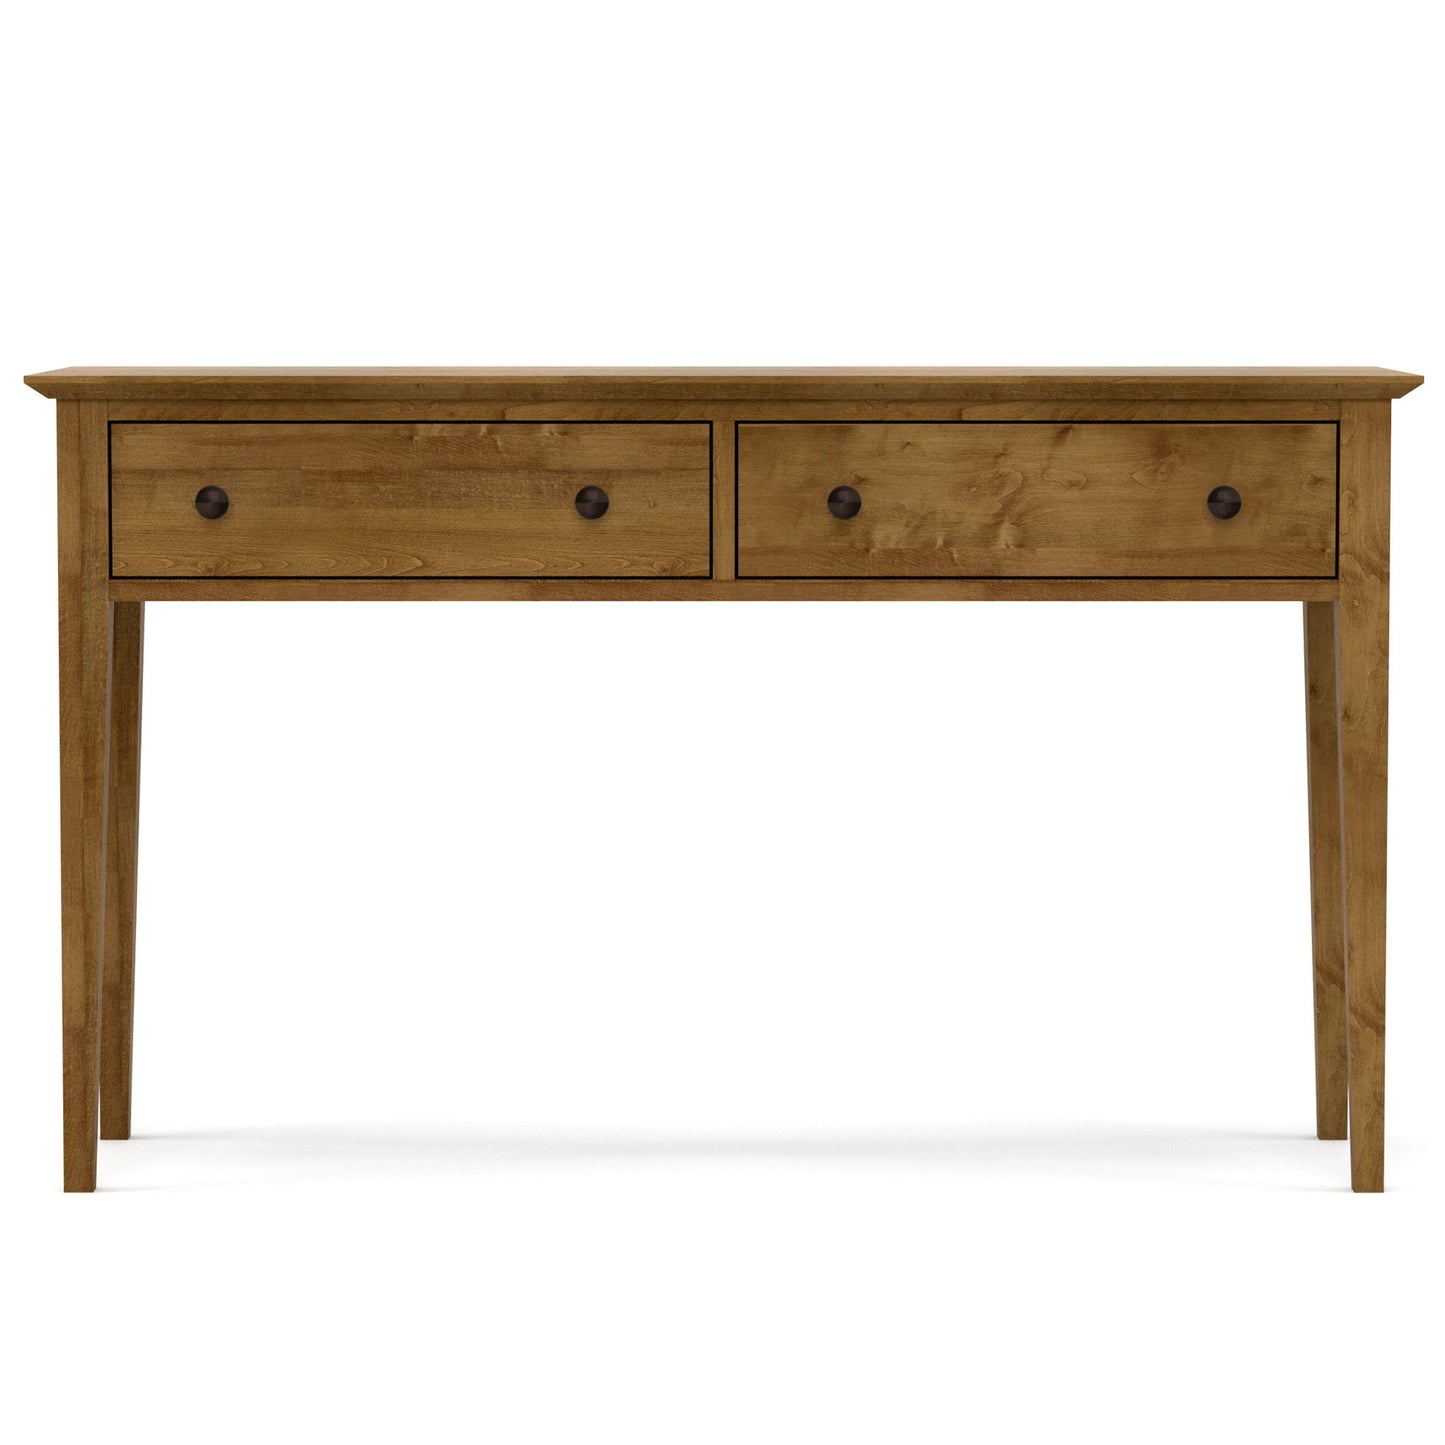 Gable Road Console Table